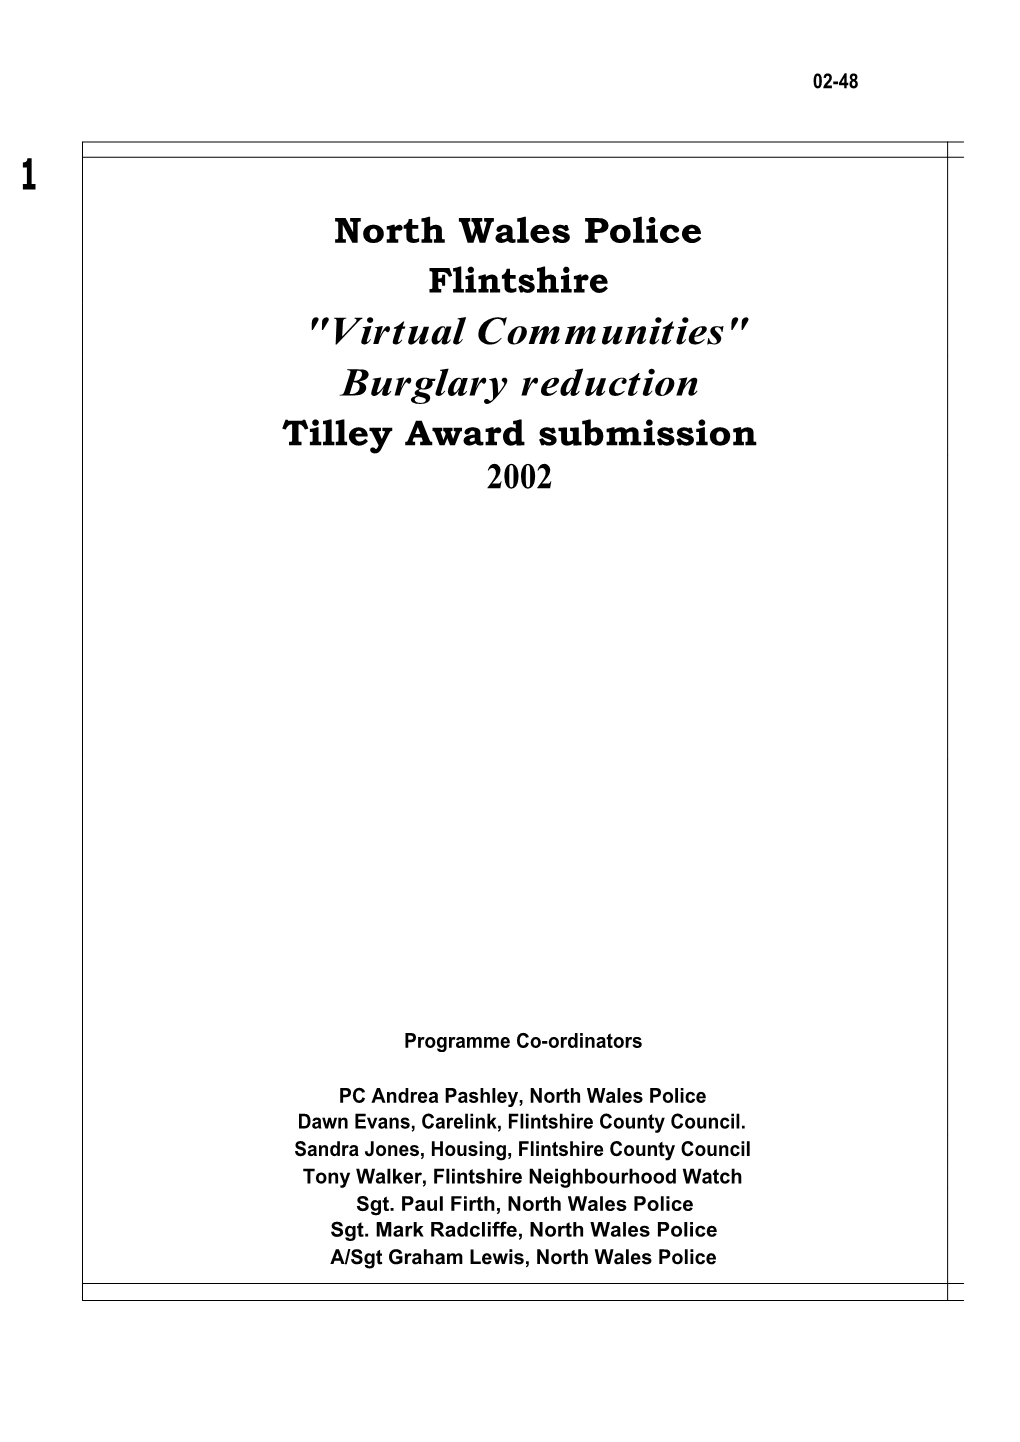 "Virtual Communities" Burglary Reduction Tilley Award Submission 2002